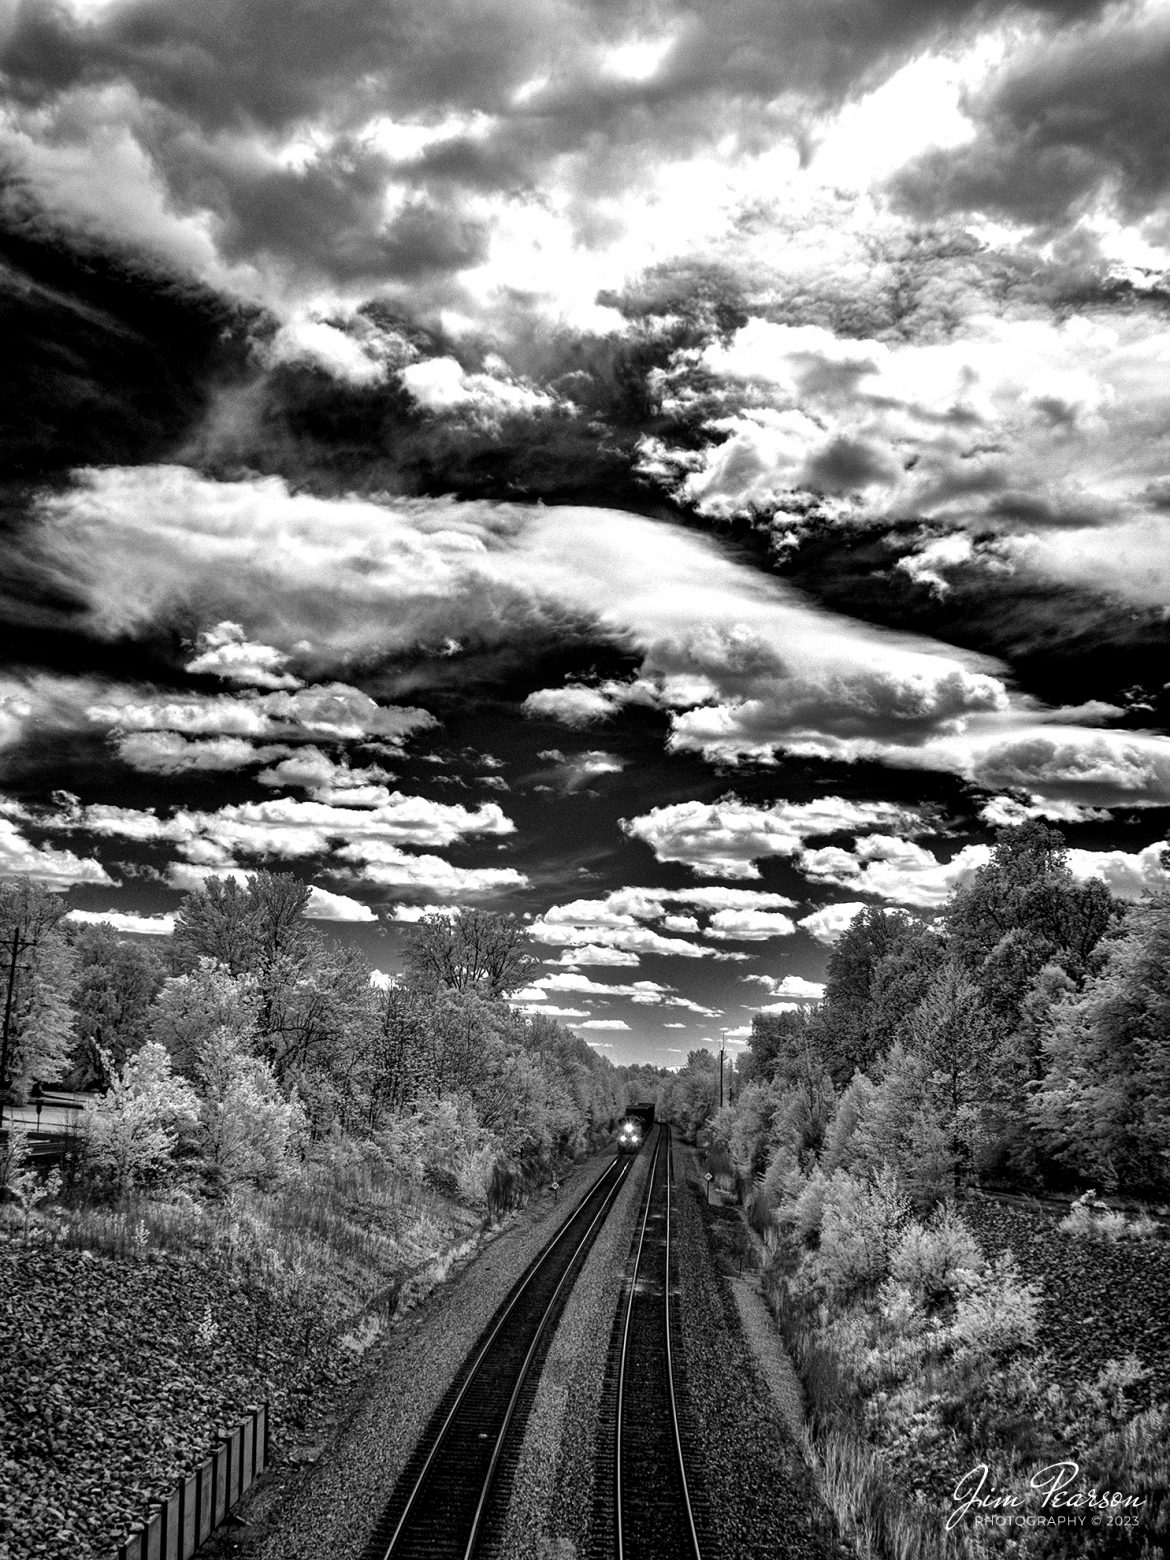 This week's Saturday Infrared photo is of CSX M512 headed north at Nortonville, Ky on the CSX Henderson Subdivision on May 2nd, 2023. This train runs daily between Radnor Yard in Nashville, TN and Avon, IN and normally works at Works Casky yard at Hopkinsville, KY, Howell Yard in Evansville, IN, and Princeton, IN. Its daily counterpart is M513.

Tech Info: Fuji XT-1, RAW, Converted to 720nm B&W IR, Nikon 10-24mm @18mm, f/6.3, 1/250, ISO 200.

#trainphotography #railroadphotography #trains #railways #jimpearsonphotography #infraredtrainphotography #infraredphotography #trainphotographer #railroadphotographer #csxrailroad #csxhendersonsubdivision